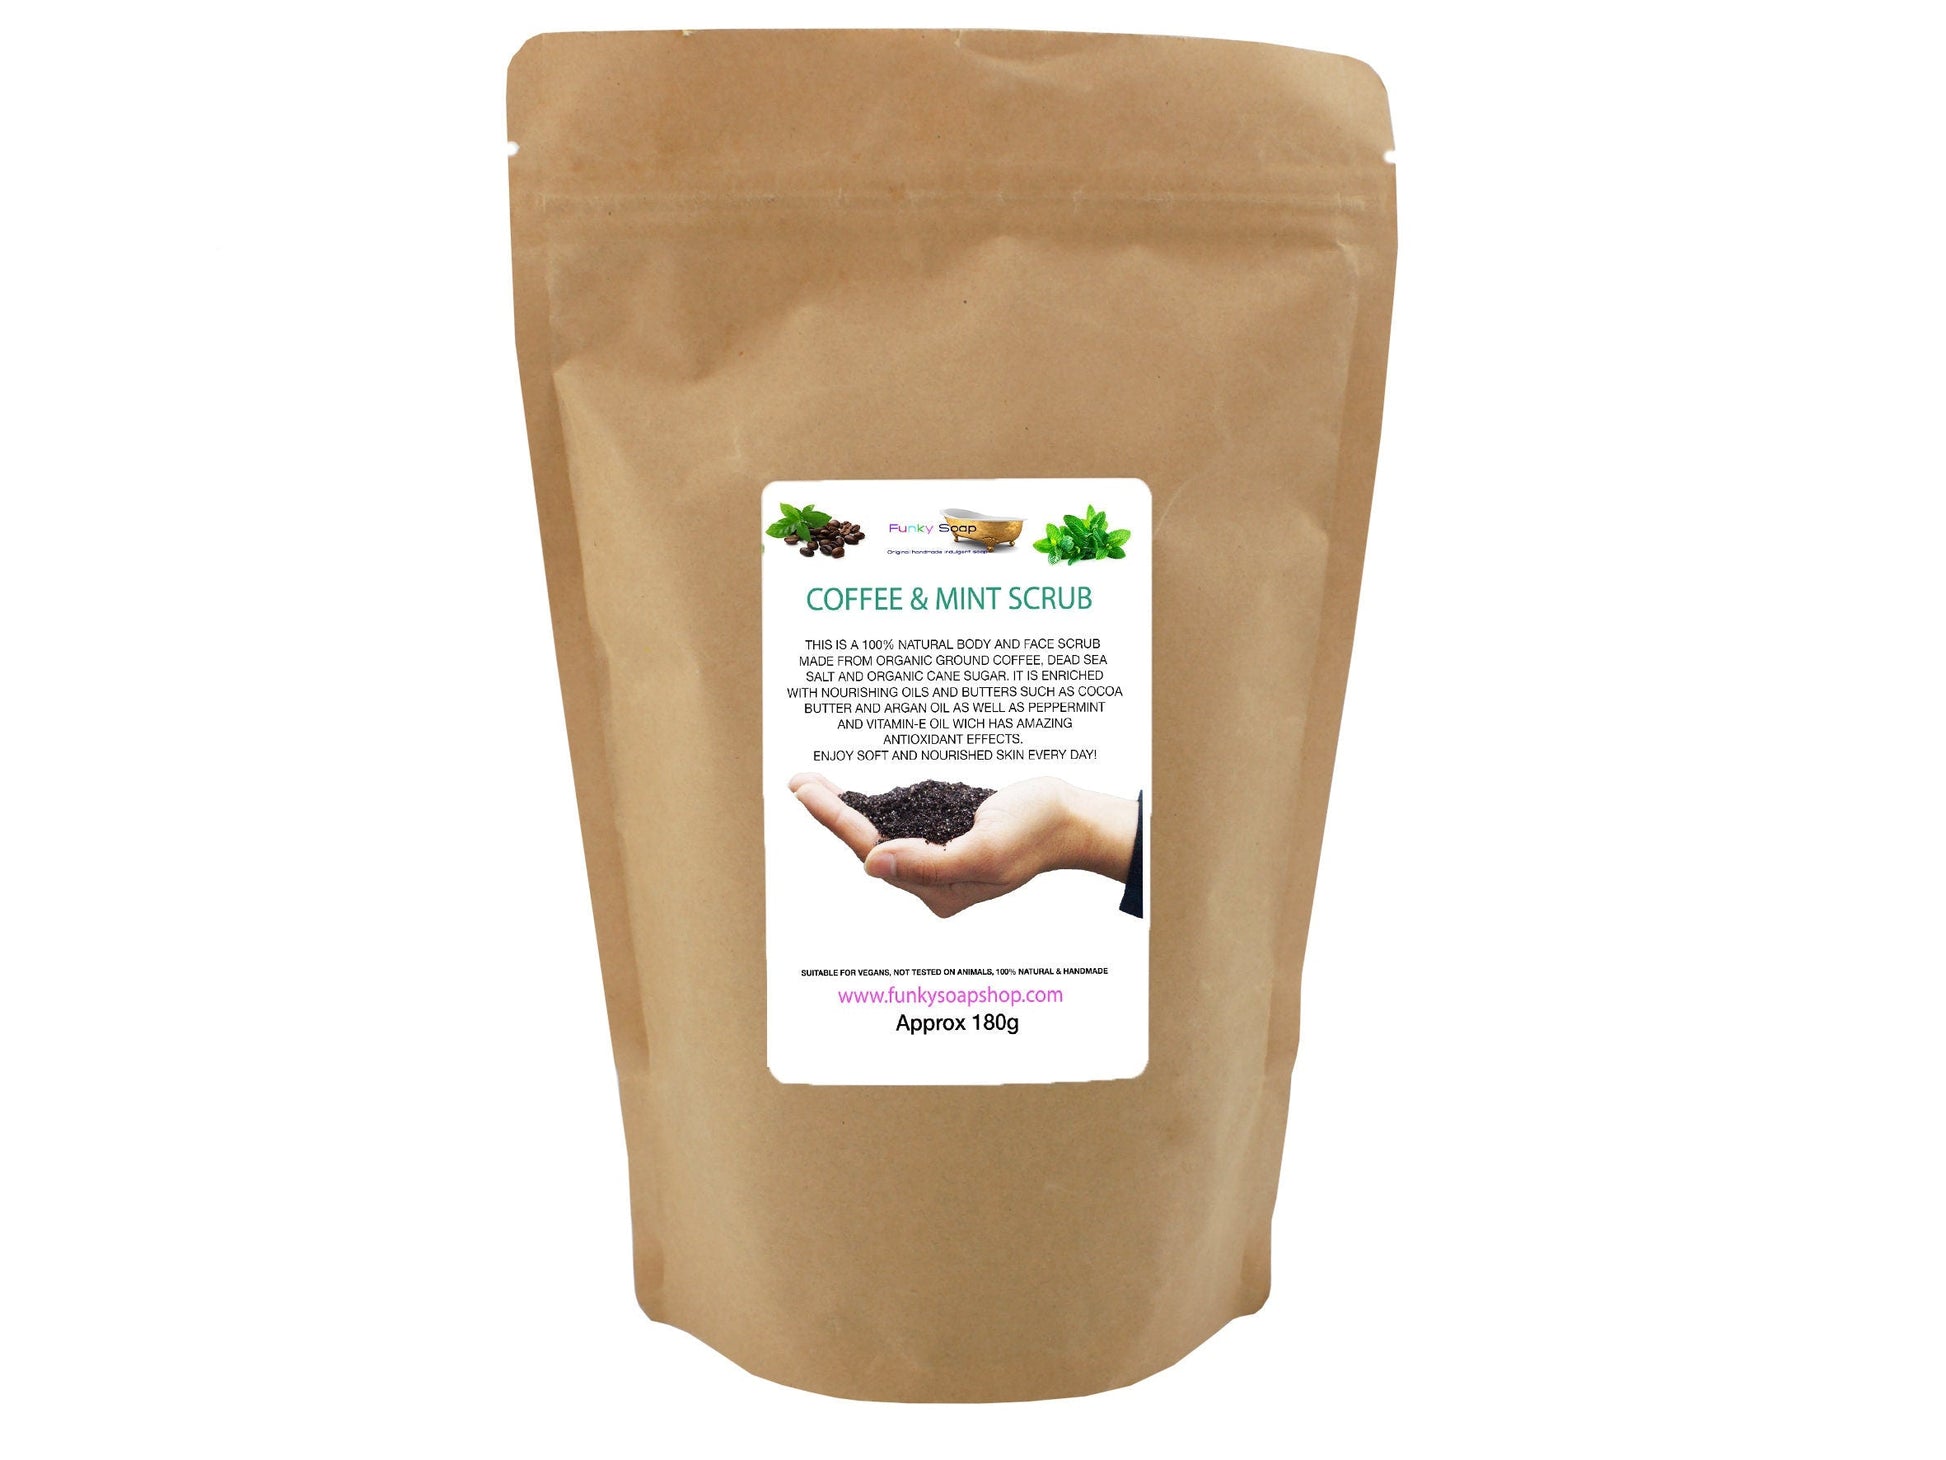 Coffee & Mint Body and Face Scrub, 100% Natural, 180g - Funky Soap Shop